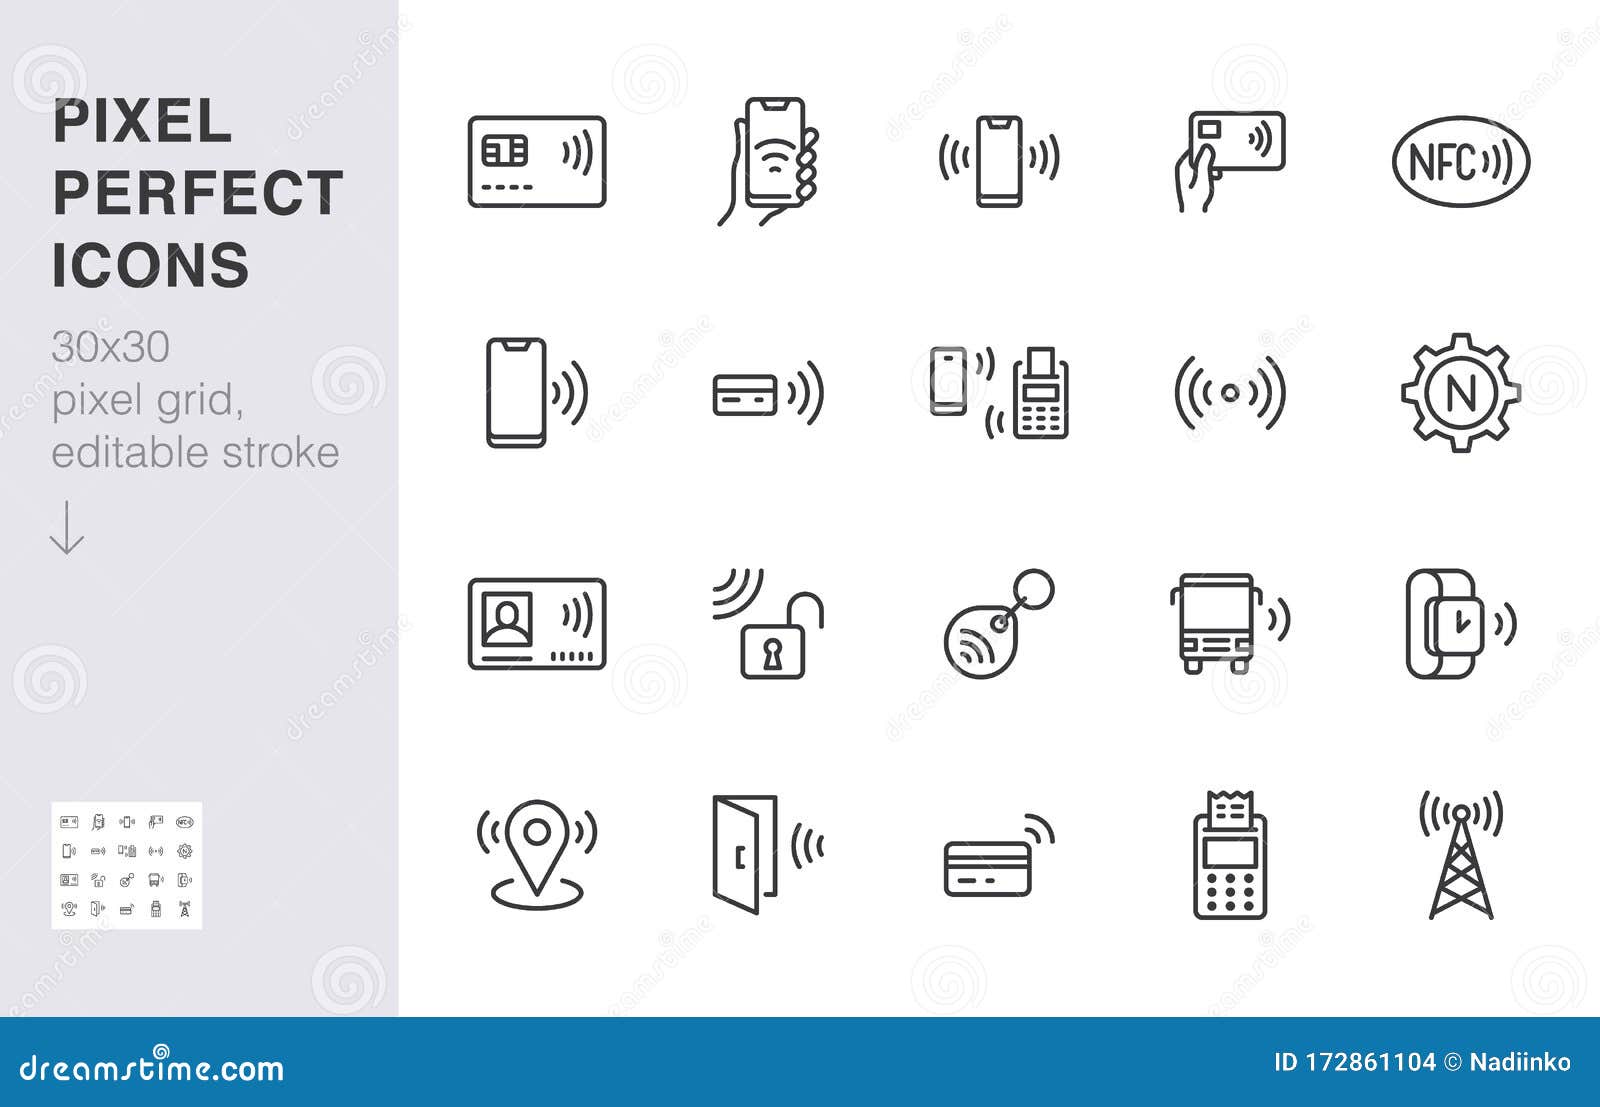 nfc line icon set. near field communication technology, contactless payment, card with chip minimal  